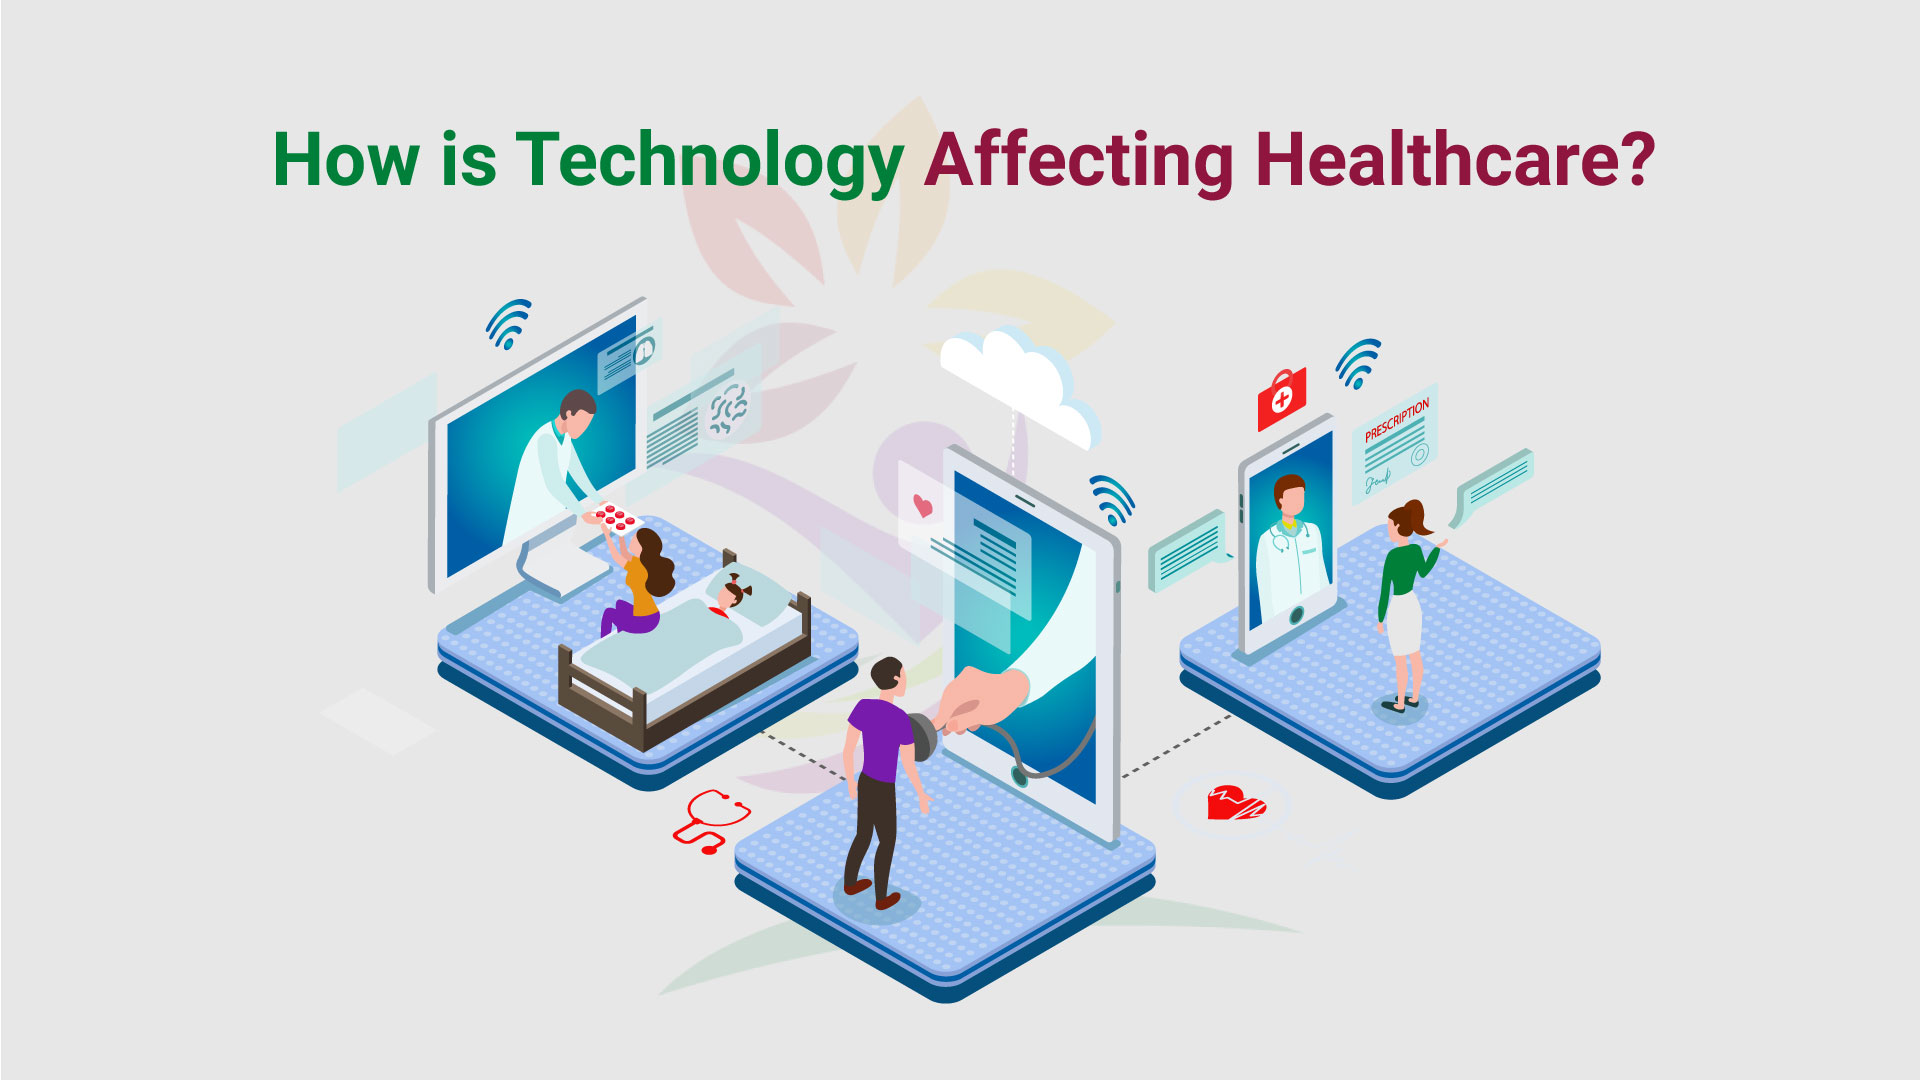 Technology in healthcare